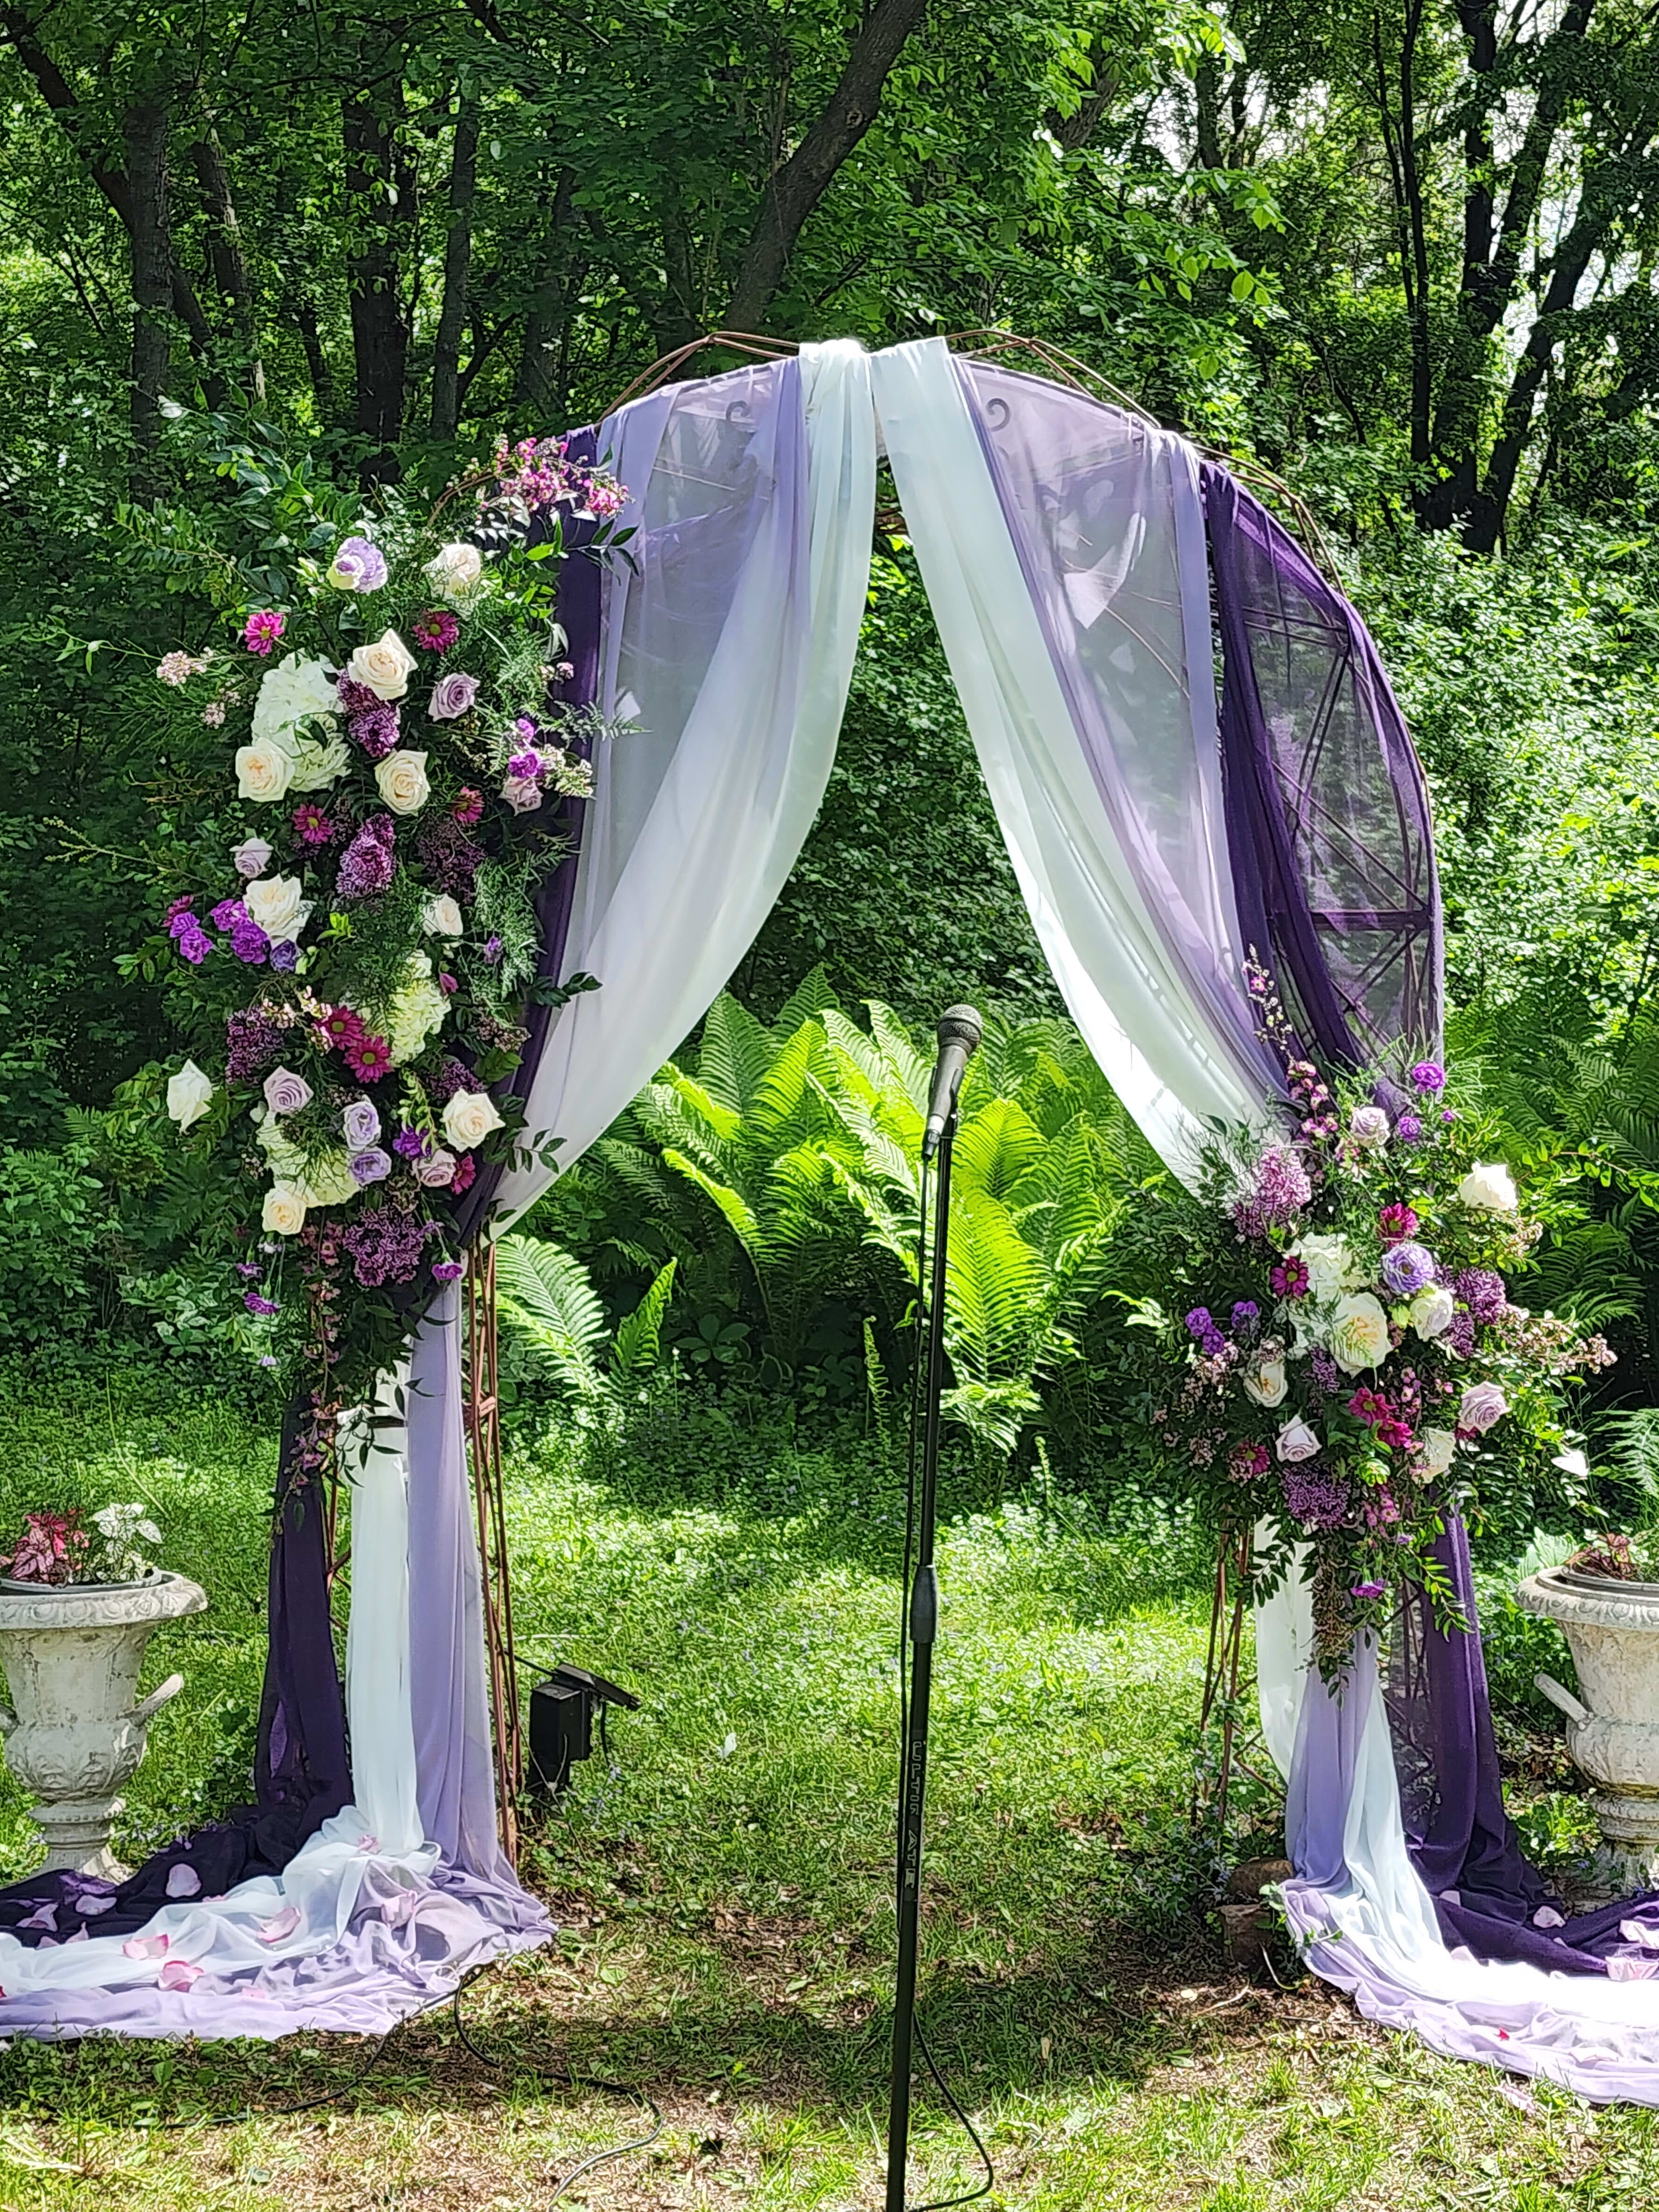 Lavender Wedding Arch - Love is in the air when your nuptials are exchanged in front of this grand floral arch.